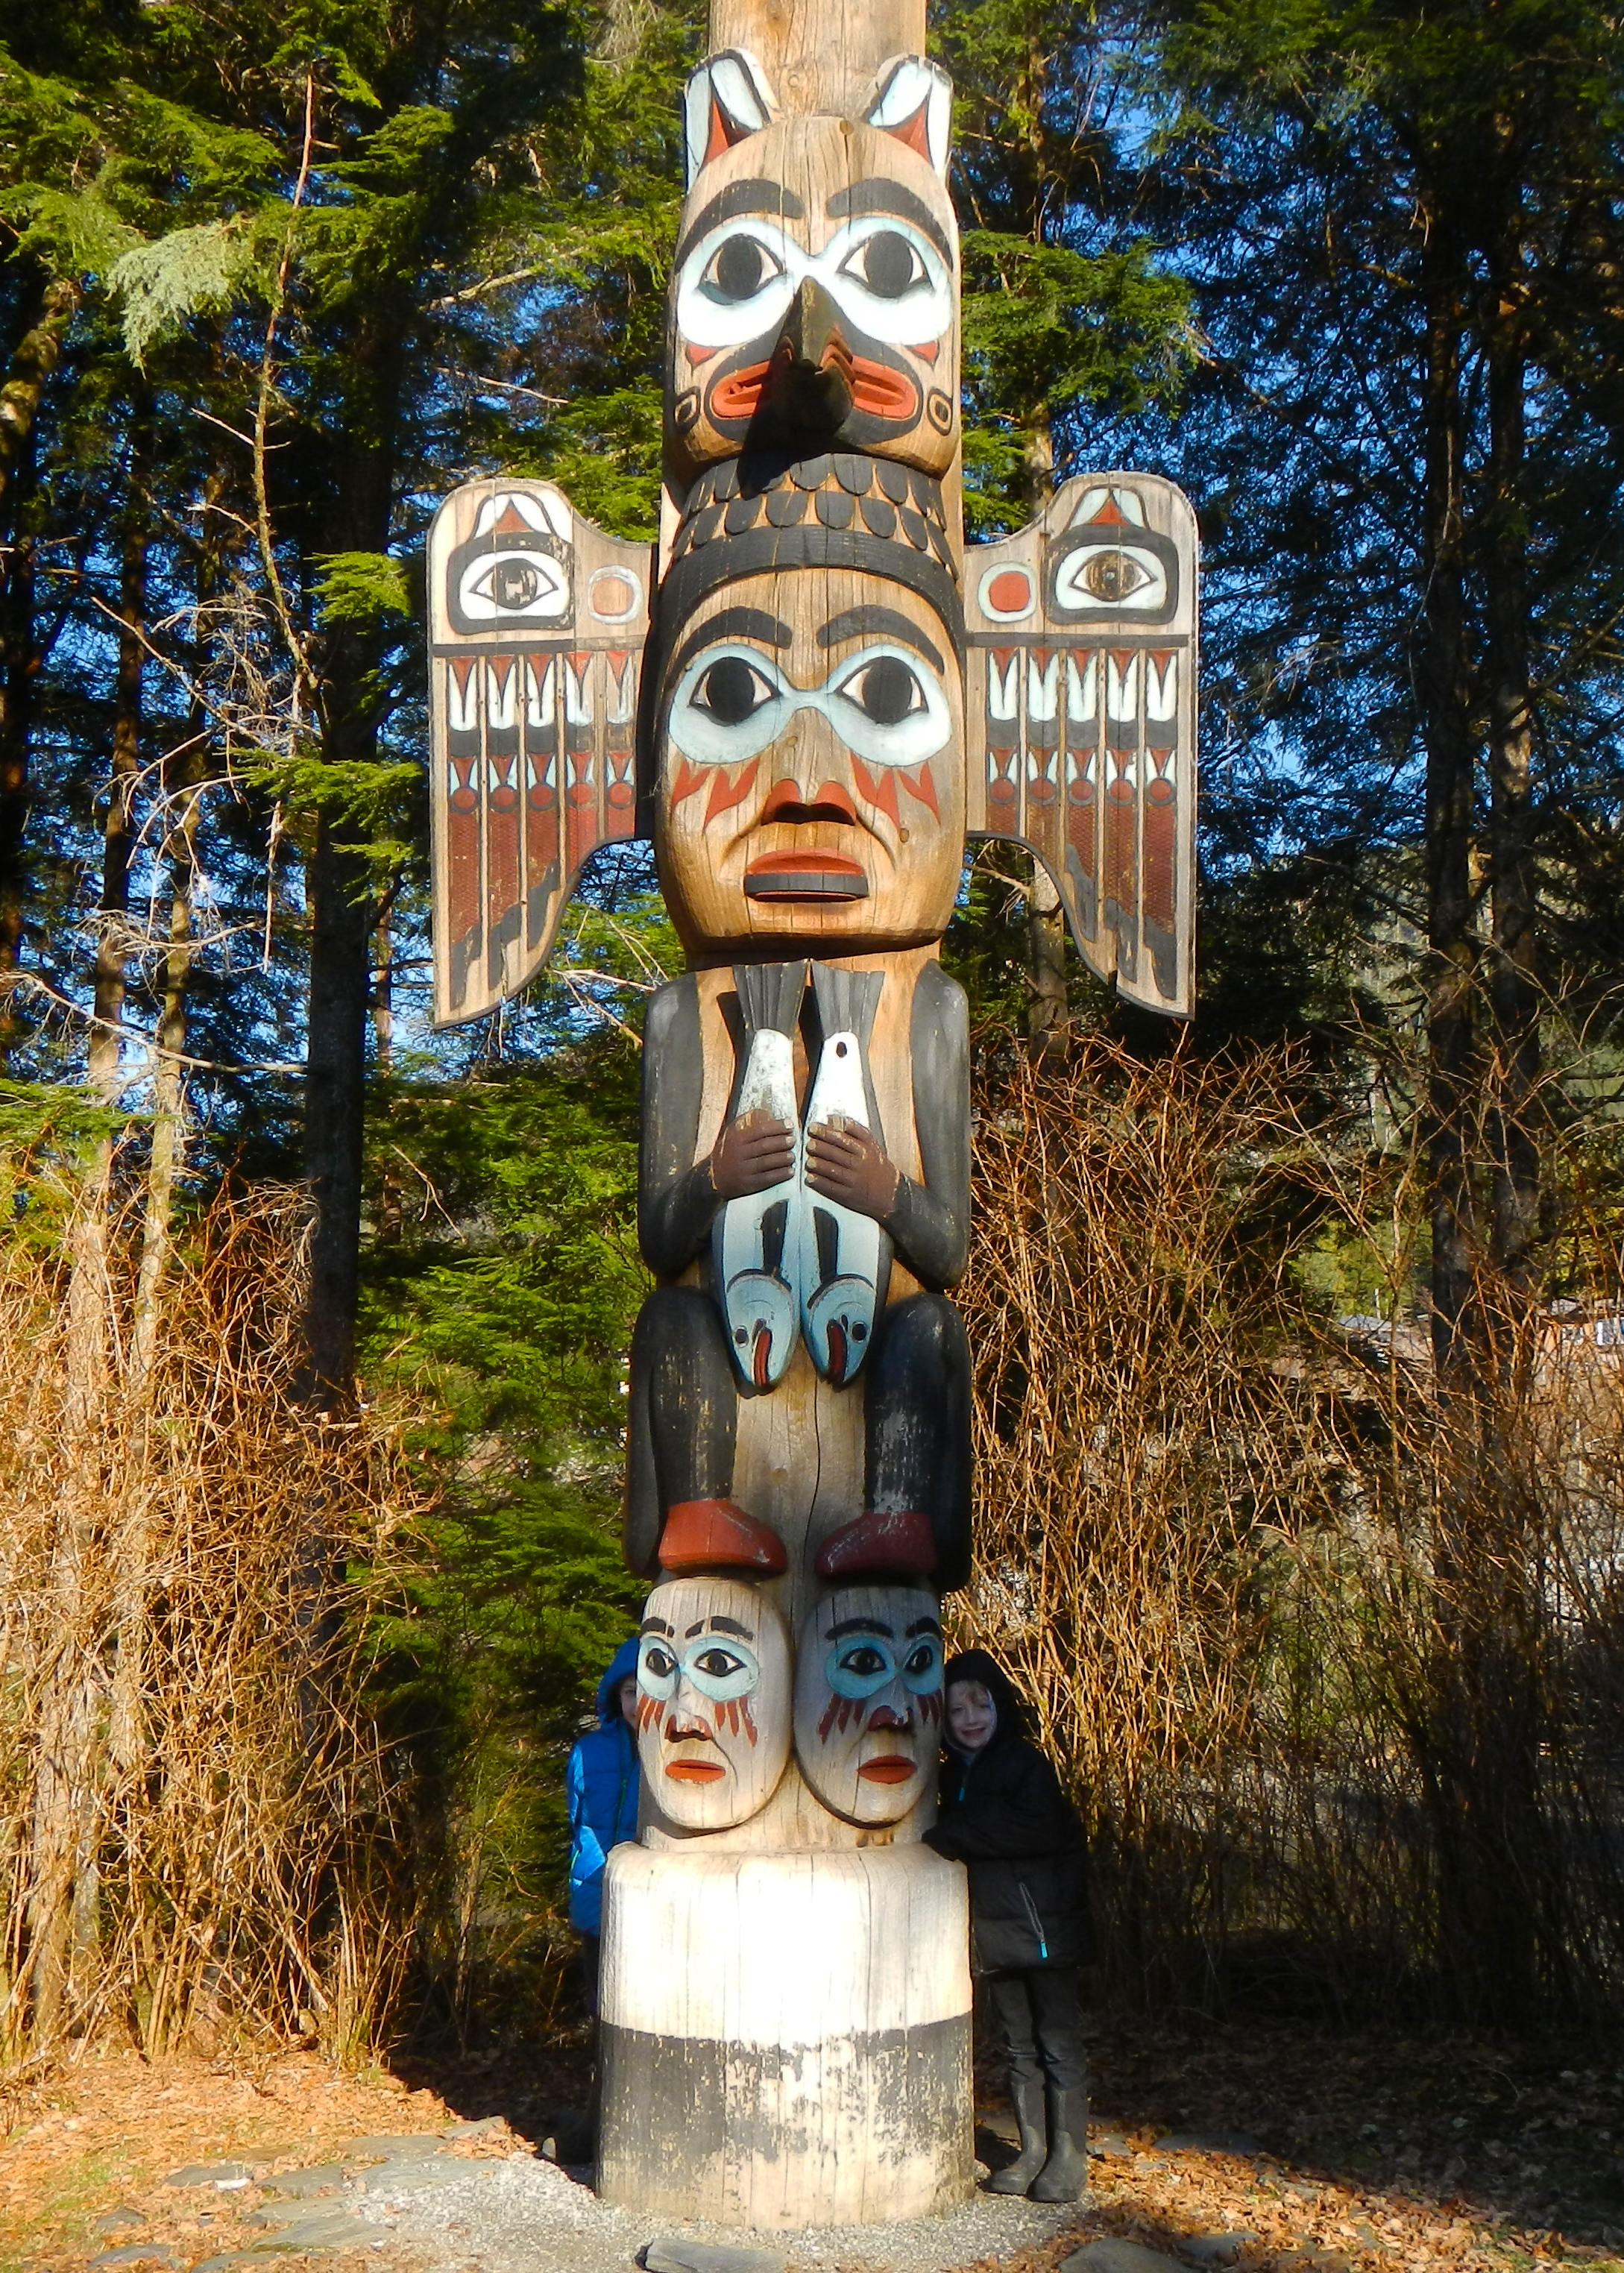  Totem Bight is a great place to learn about totem poles and native culture and check out the beach area with the kids. 